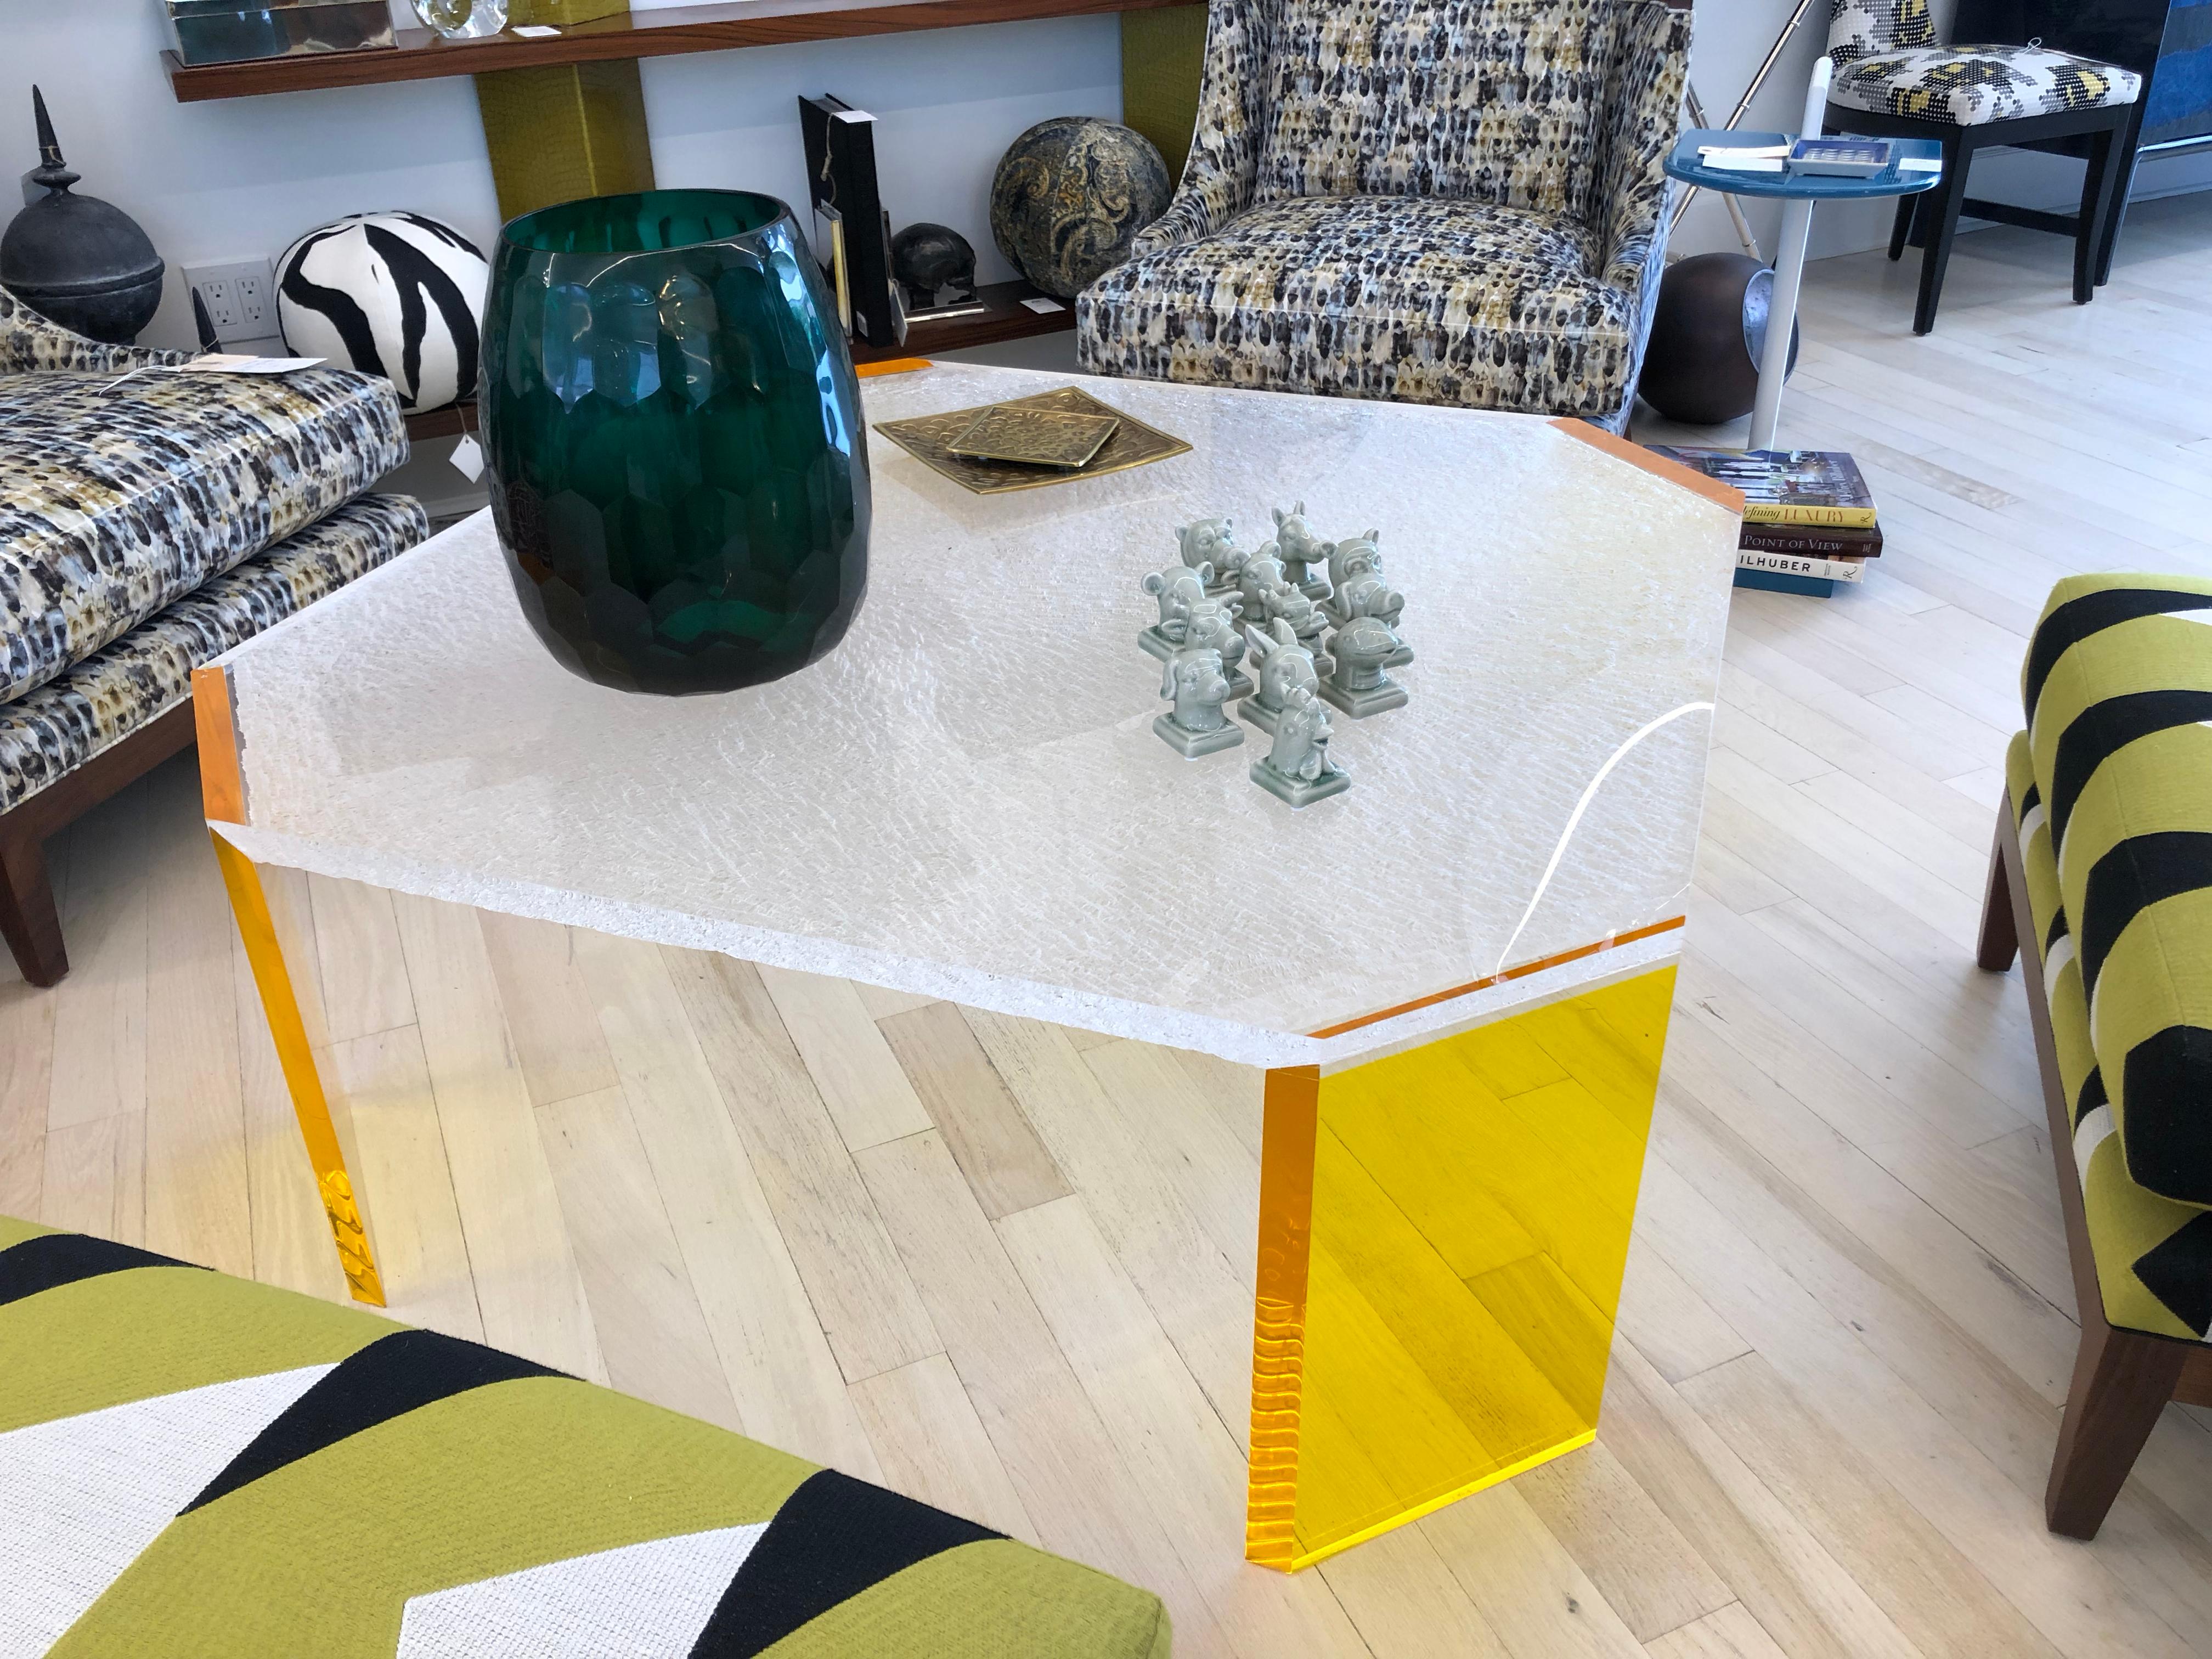 The crackled coffee table is a handcrafted modern coffee table made out of Lucite. The table features a clear one inch thick top with crystalized effects and reflective yellow legs. The table is available now as is or color customization and size is